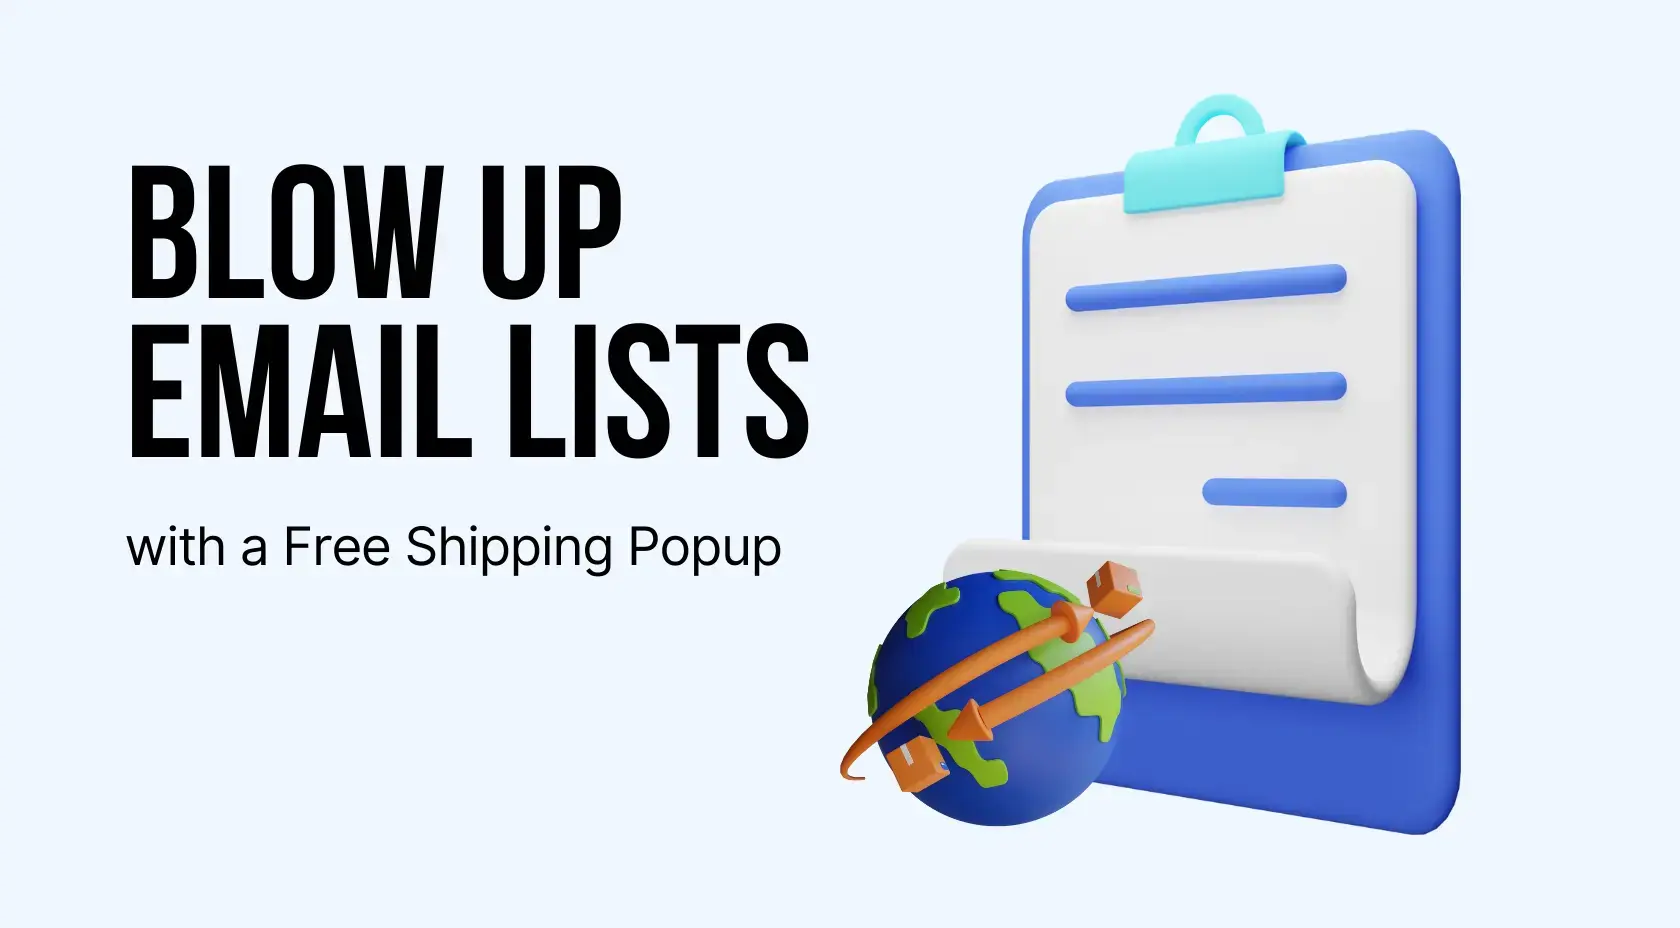 Blow Up Email Lists Effortlessly with a Free Shipping Popup